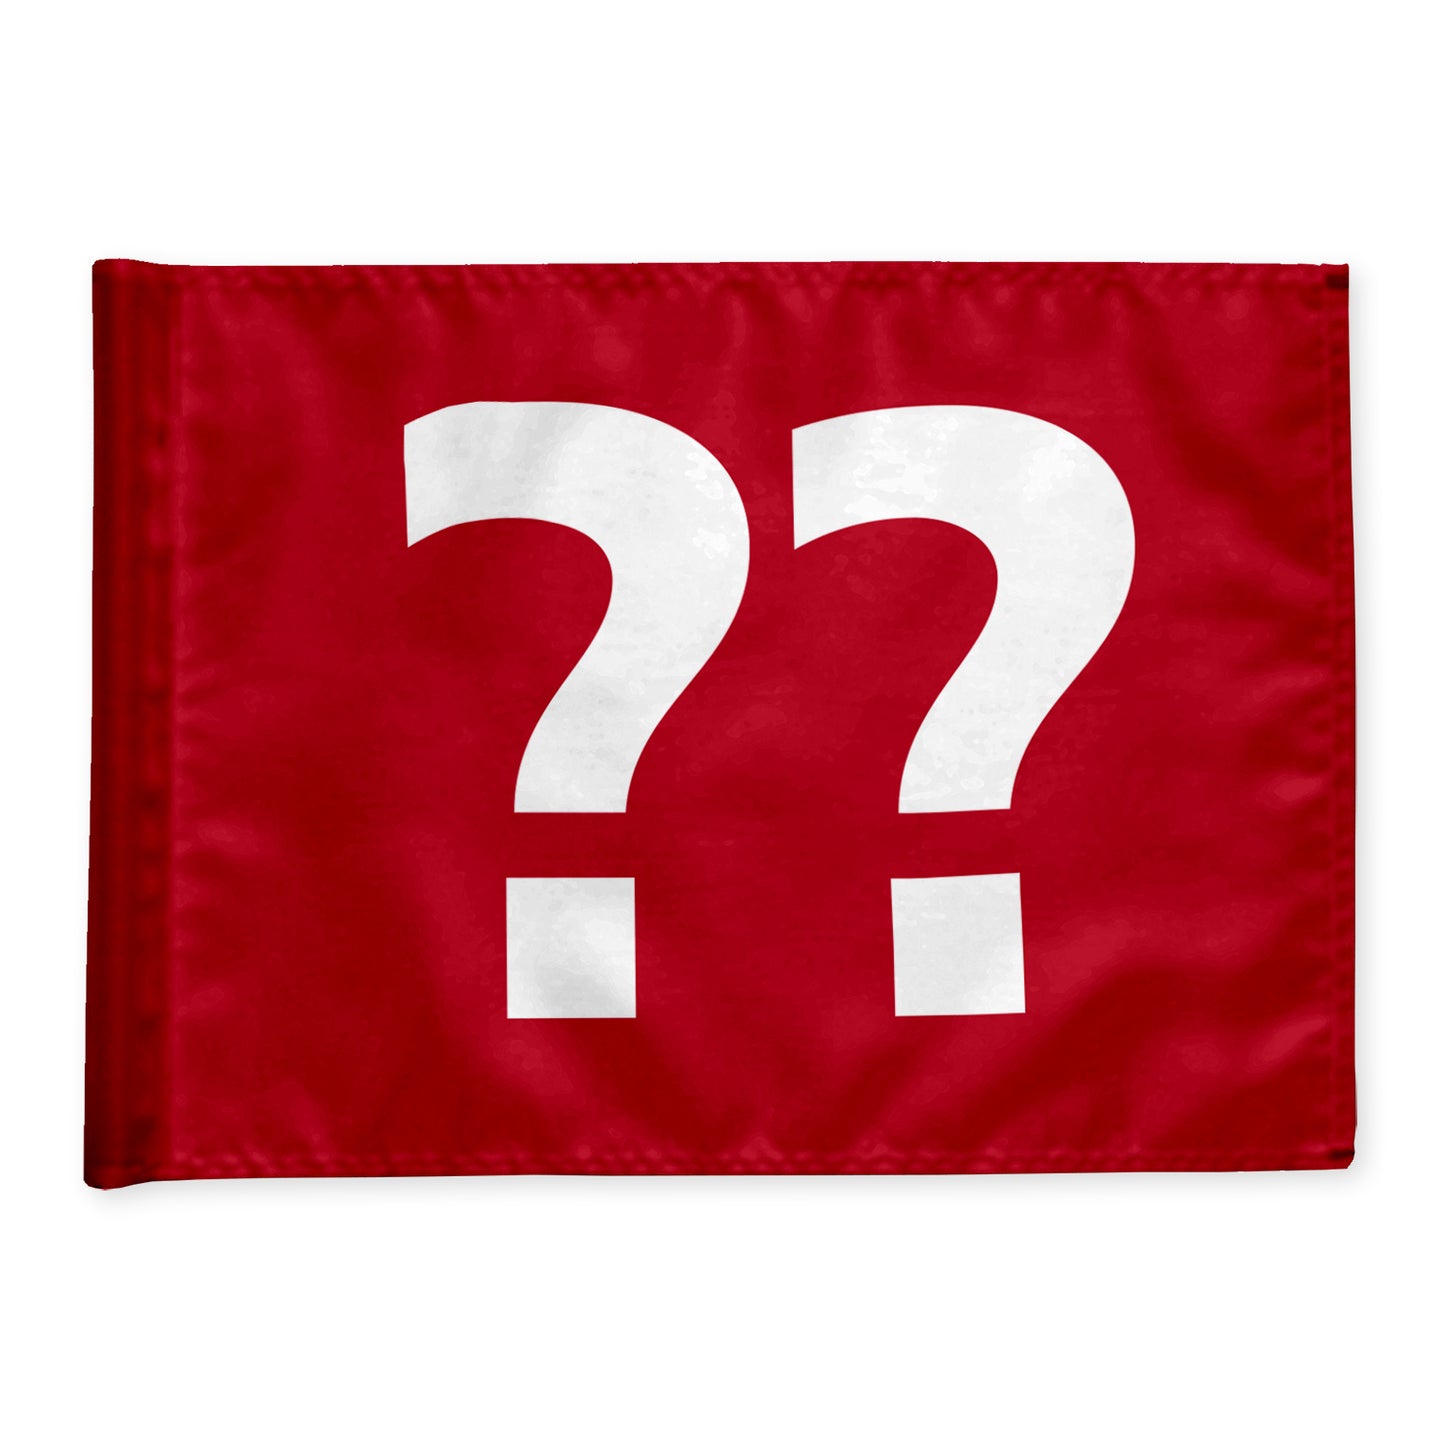 Single golf flag, red with optional hole number, 200 gram fabric